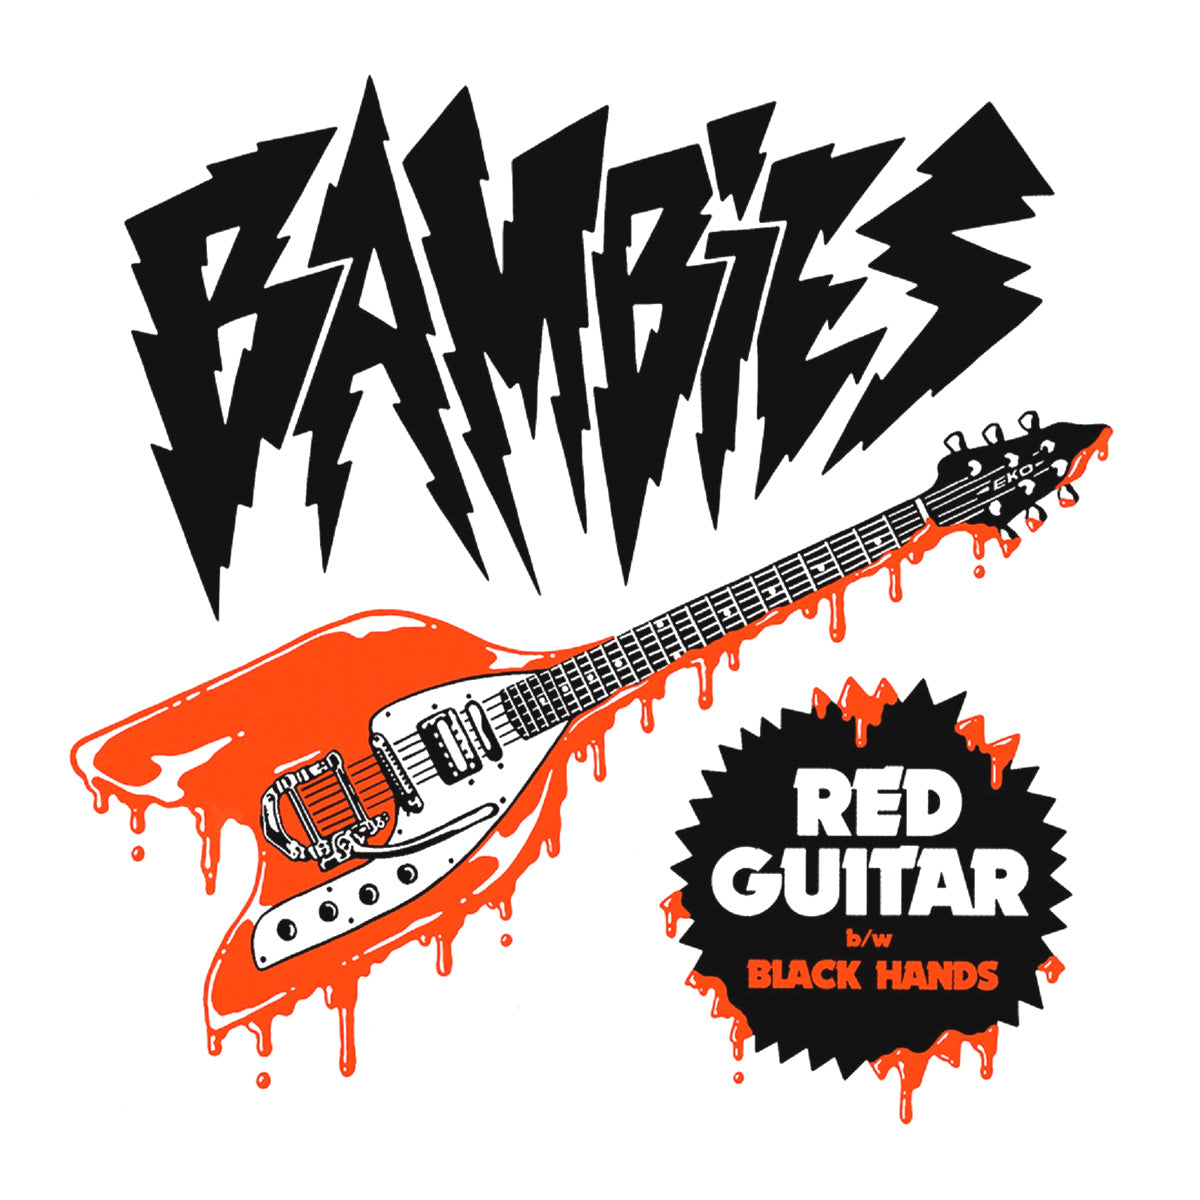 Bambies- Red Guitar 7" ~REAL KIDS!